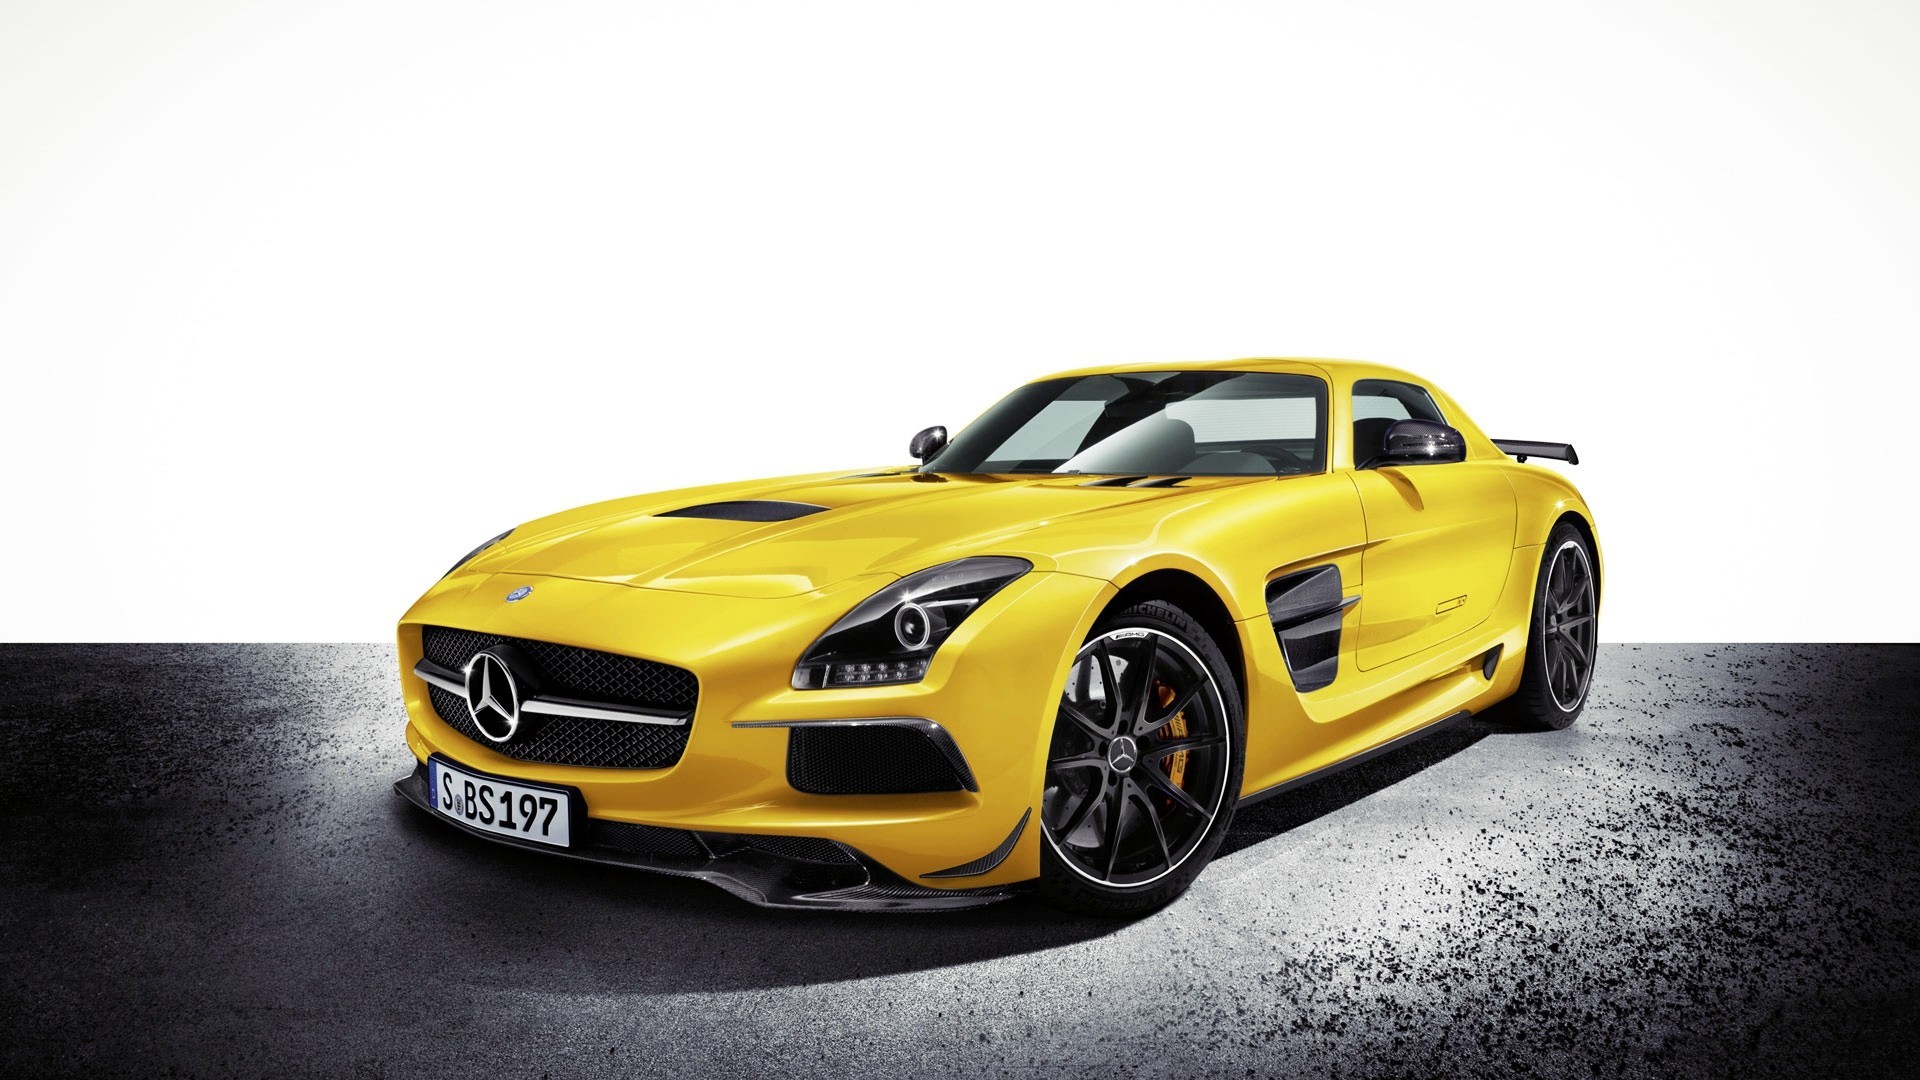 General 1920x1080 Mercedes-Benz car yellow vehicle yellow cars numbers German cars Grand Tour Mercedes-Benz SLS AMG